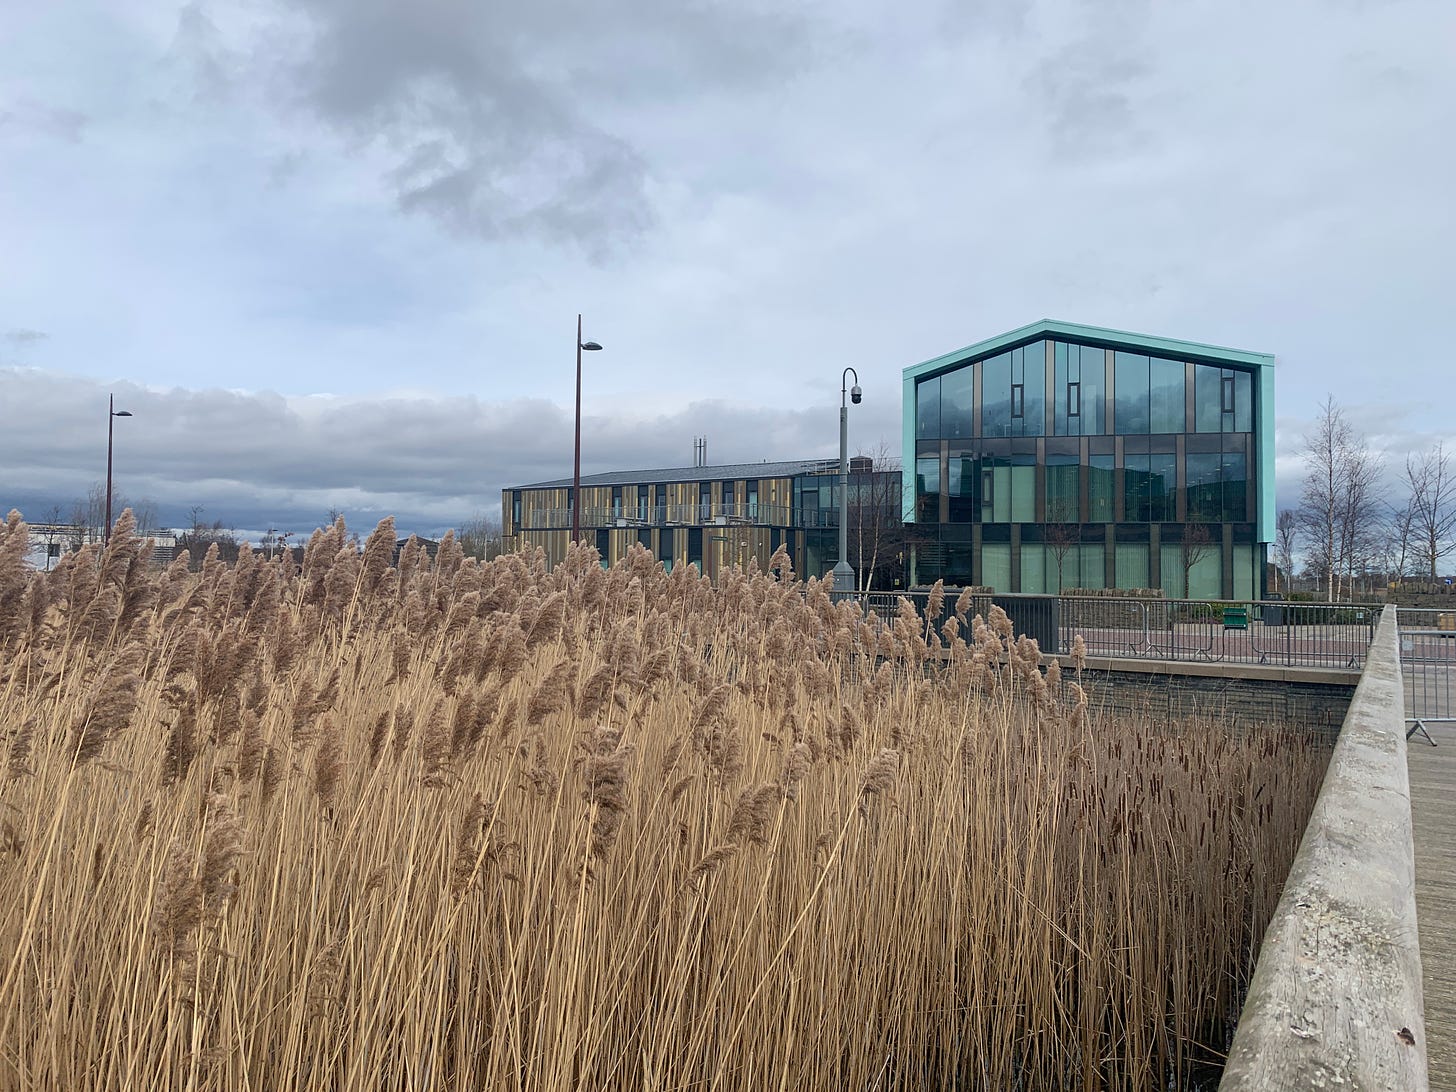 A beautiful copper and turquoise building, with a modern wooden structure to the left of it, viewed from a walkway across reeds and a lake. There's a swan in there somewhere.